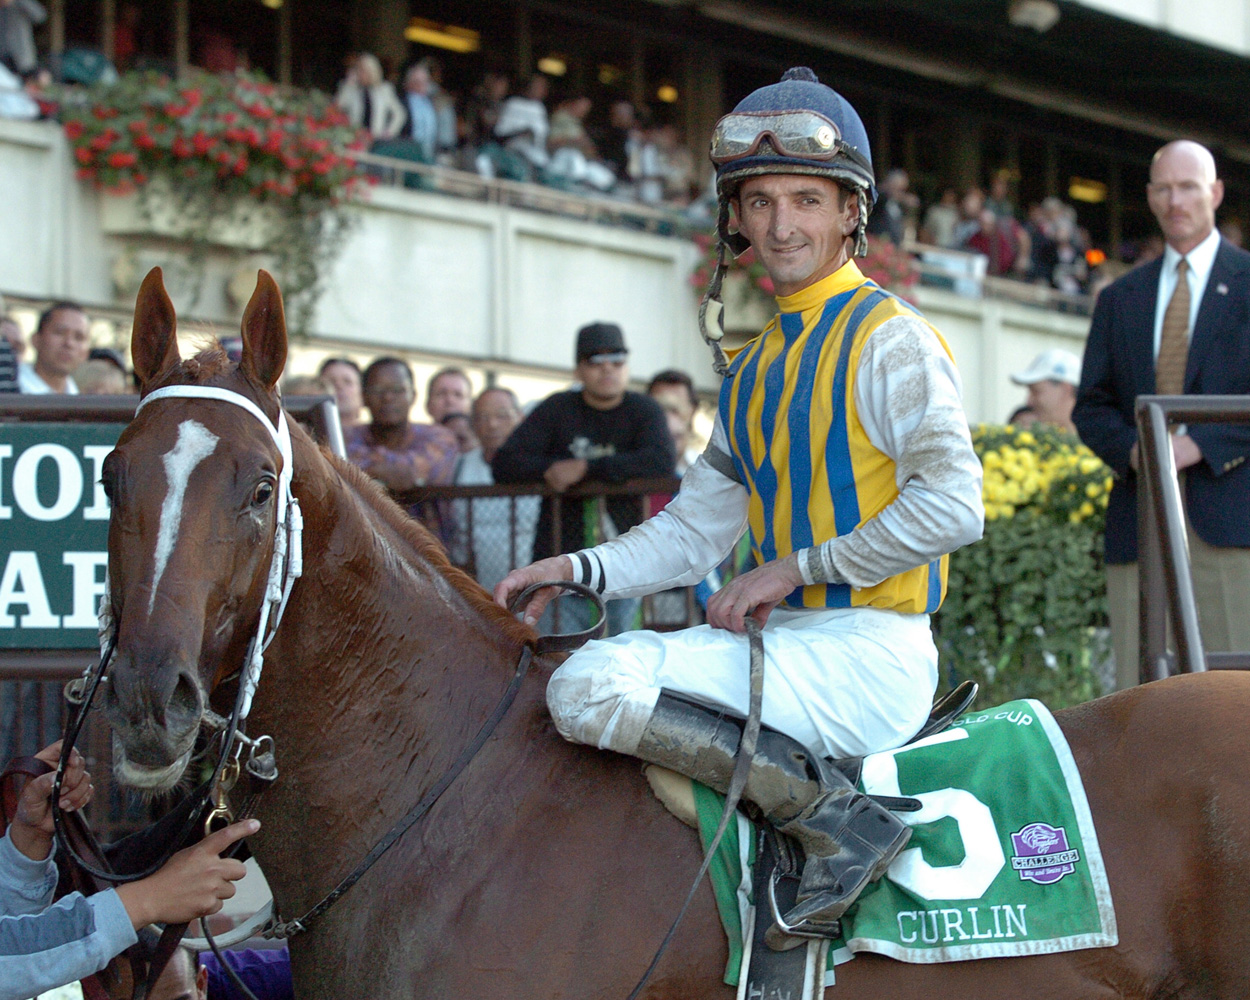 Curlin and Robby Albarado in the winner's circle for the 2007 Jockey Club Gold Cup (NYRA)